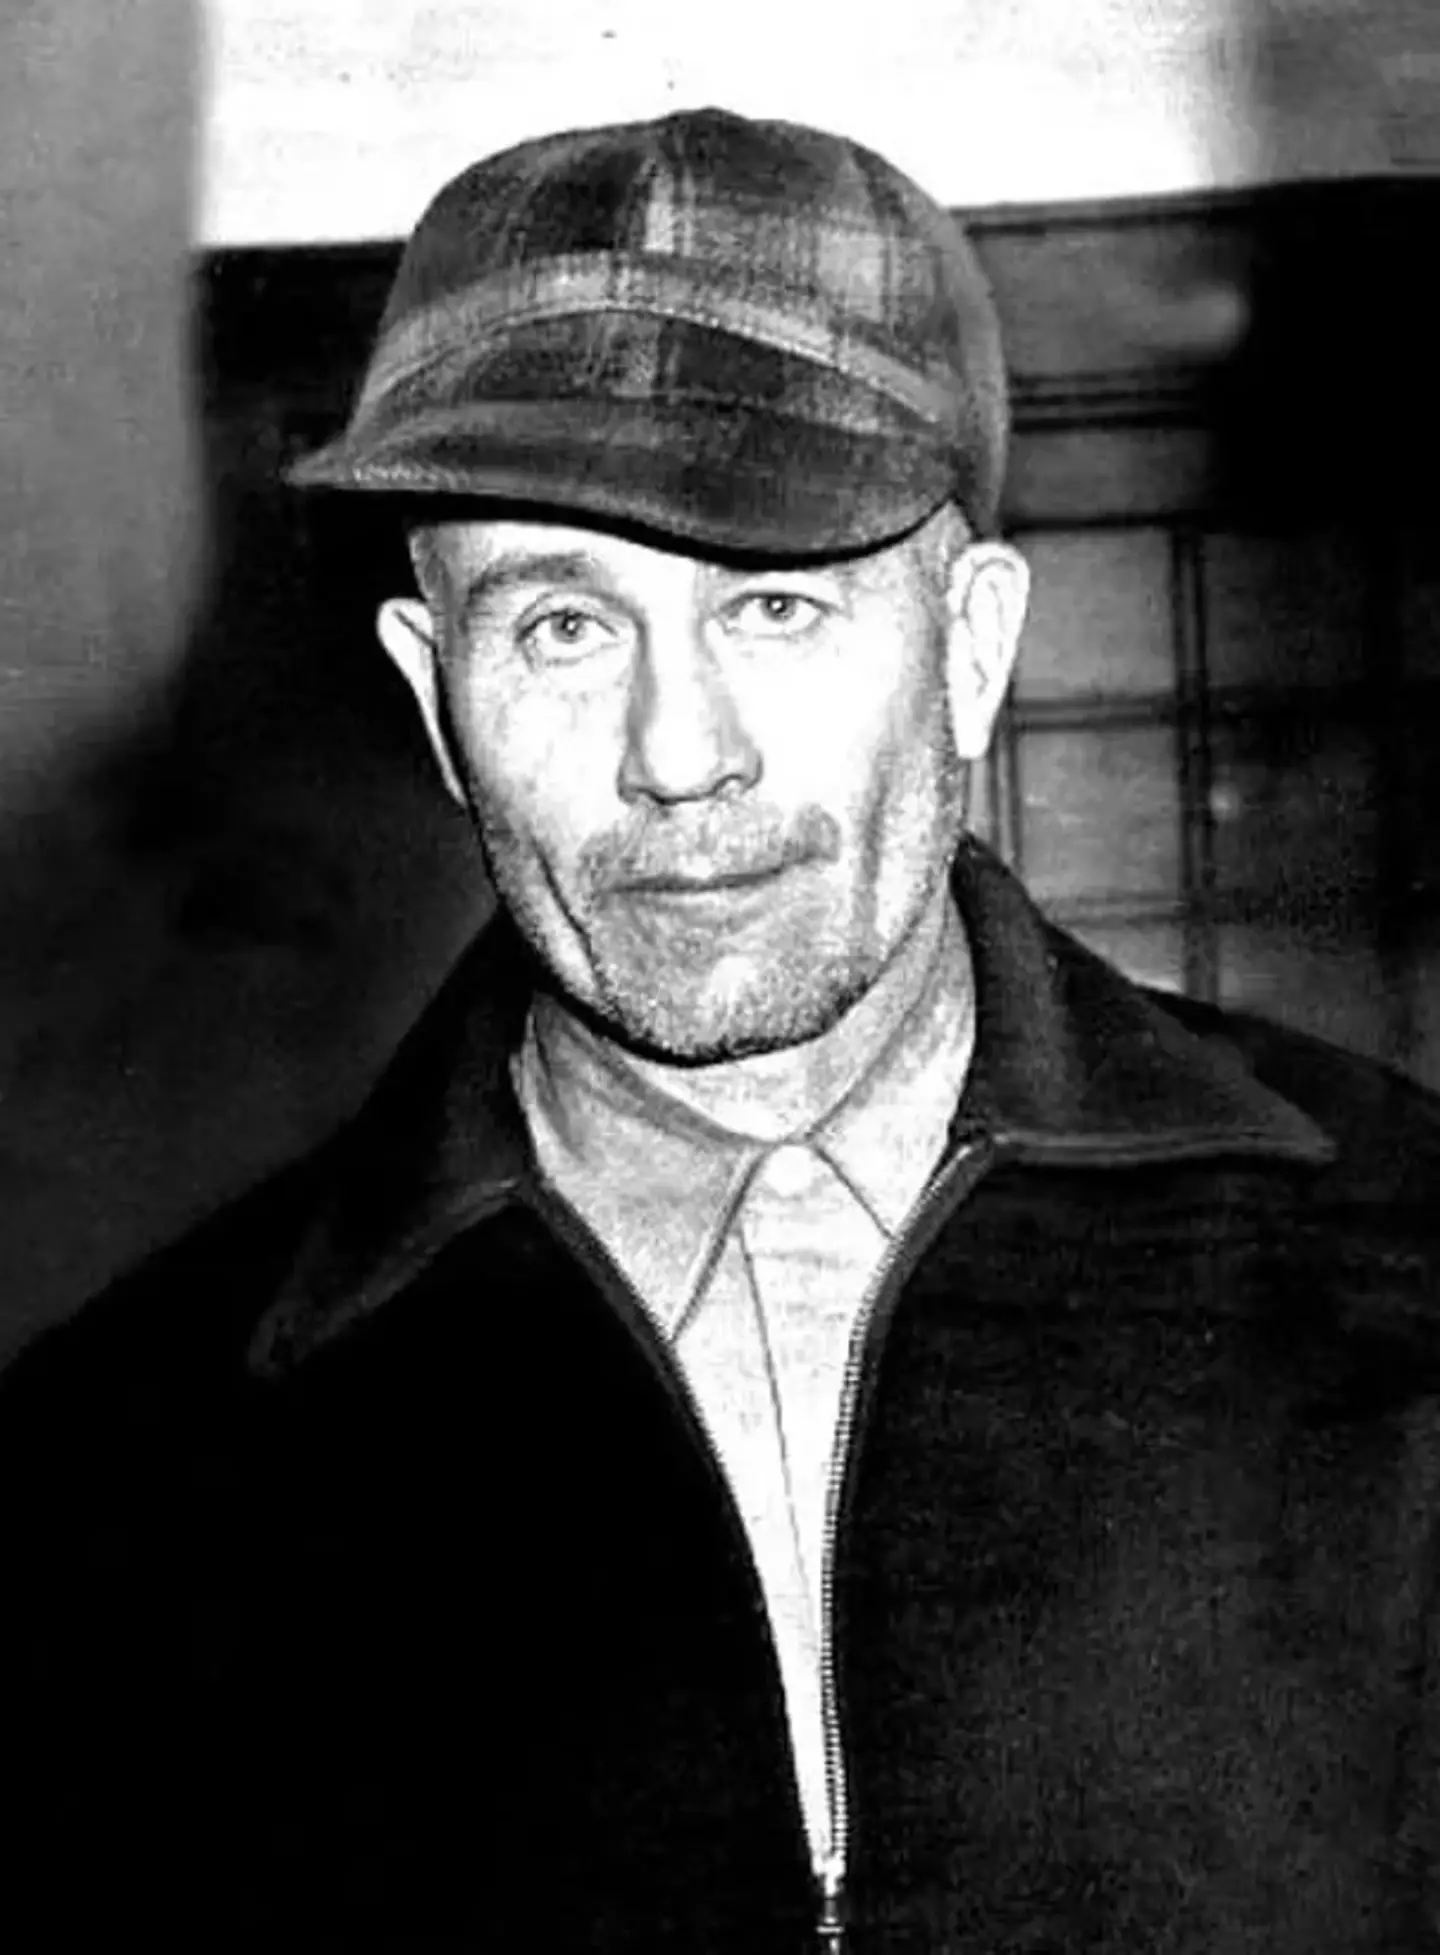 Ed Gein is the serial killer who inspired the 'Moonlight Man' in Gerald's Game.